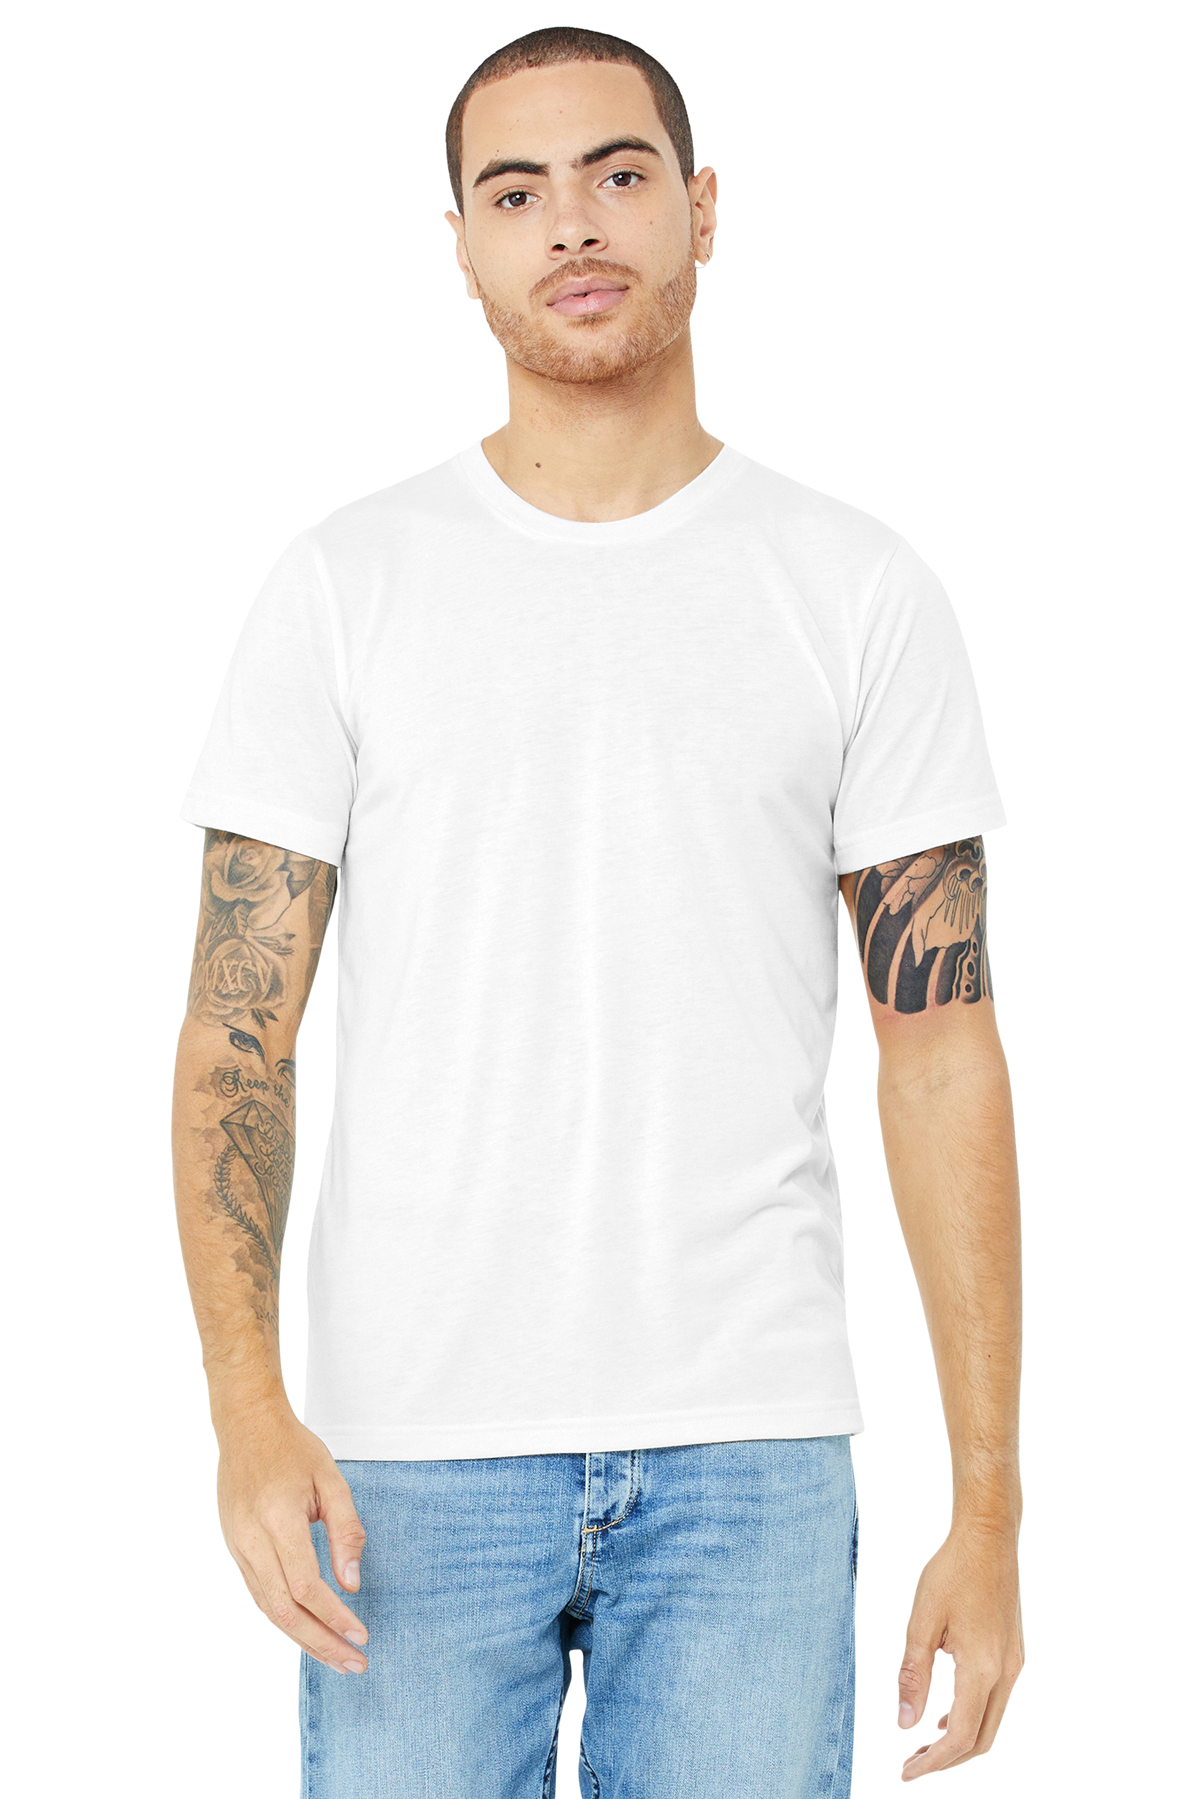 BELLA+CANVAS Unisex Made In The USA Jersey Short Sleeve Tee | Product ...